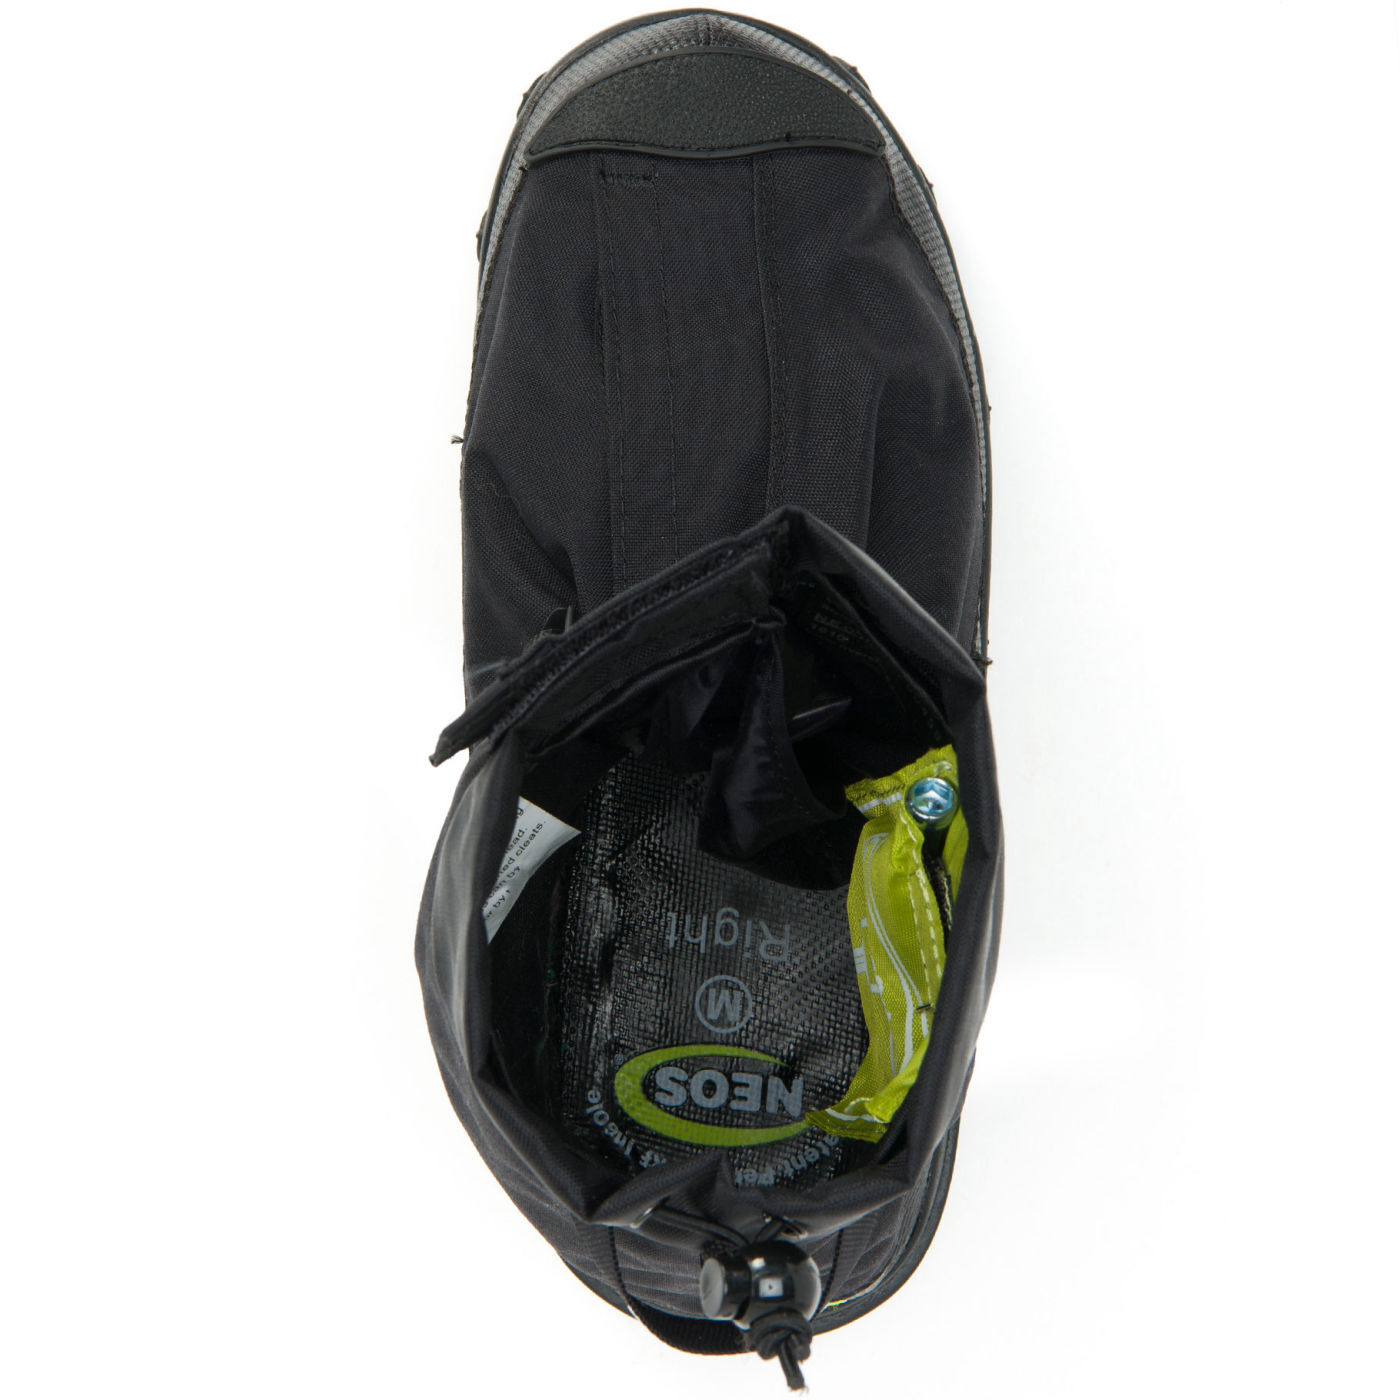 NEOS Voyager Glacier Trek SPK Overshoe + Cleats from Columbia Safety